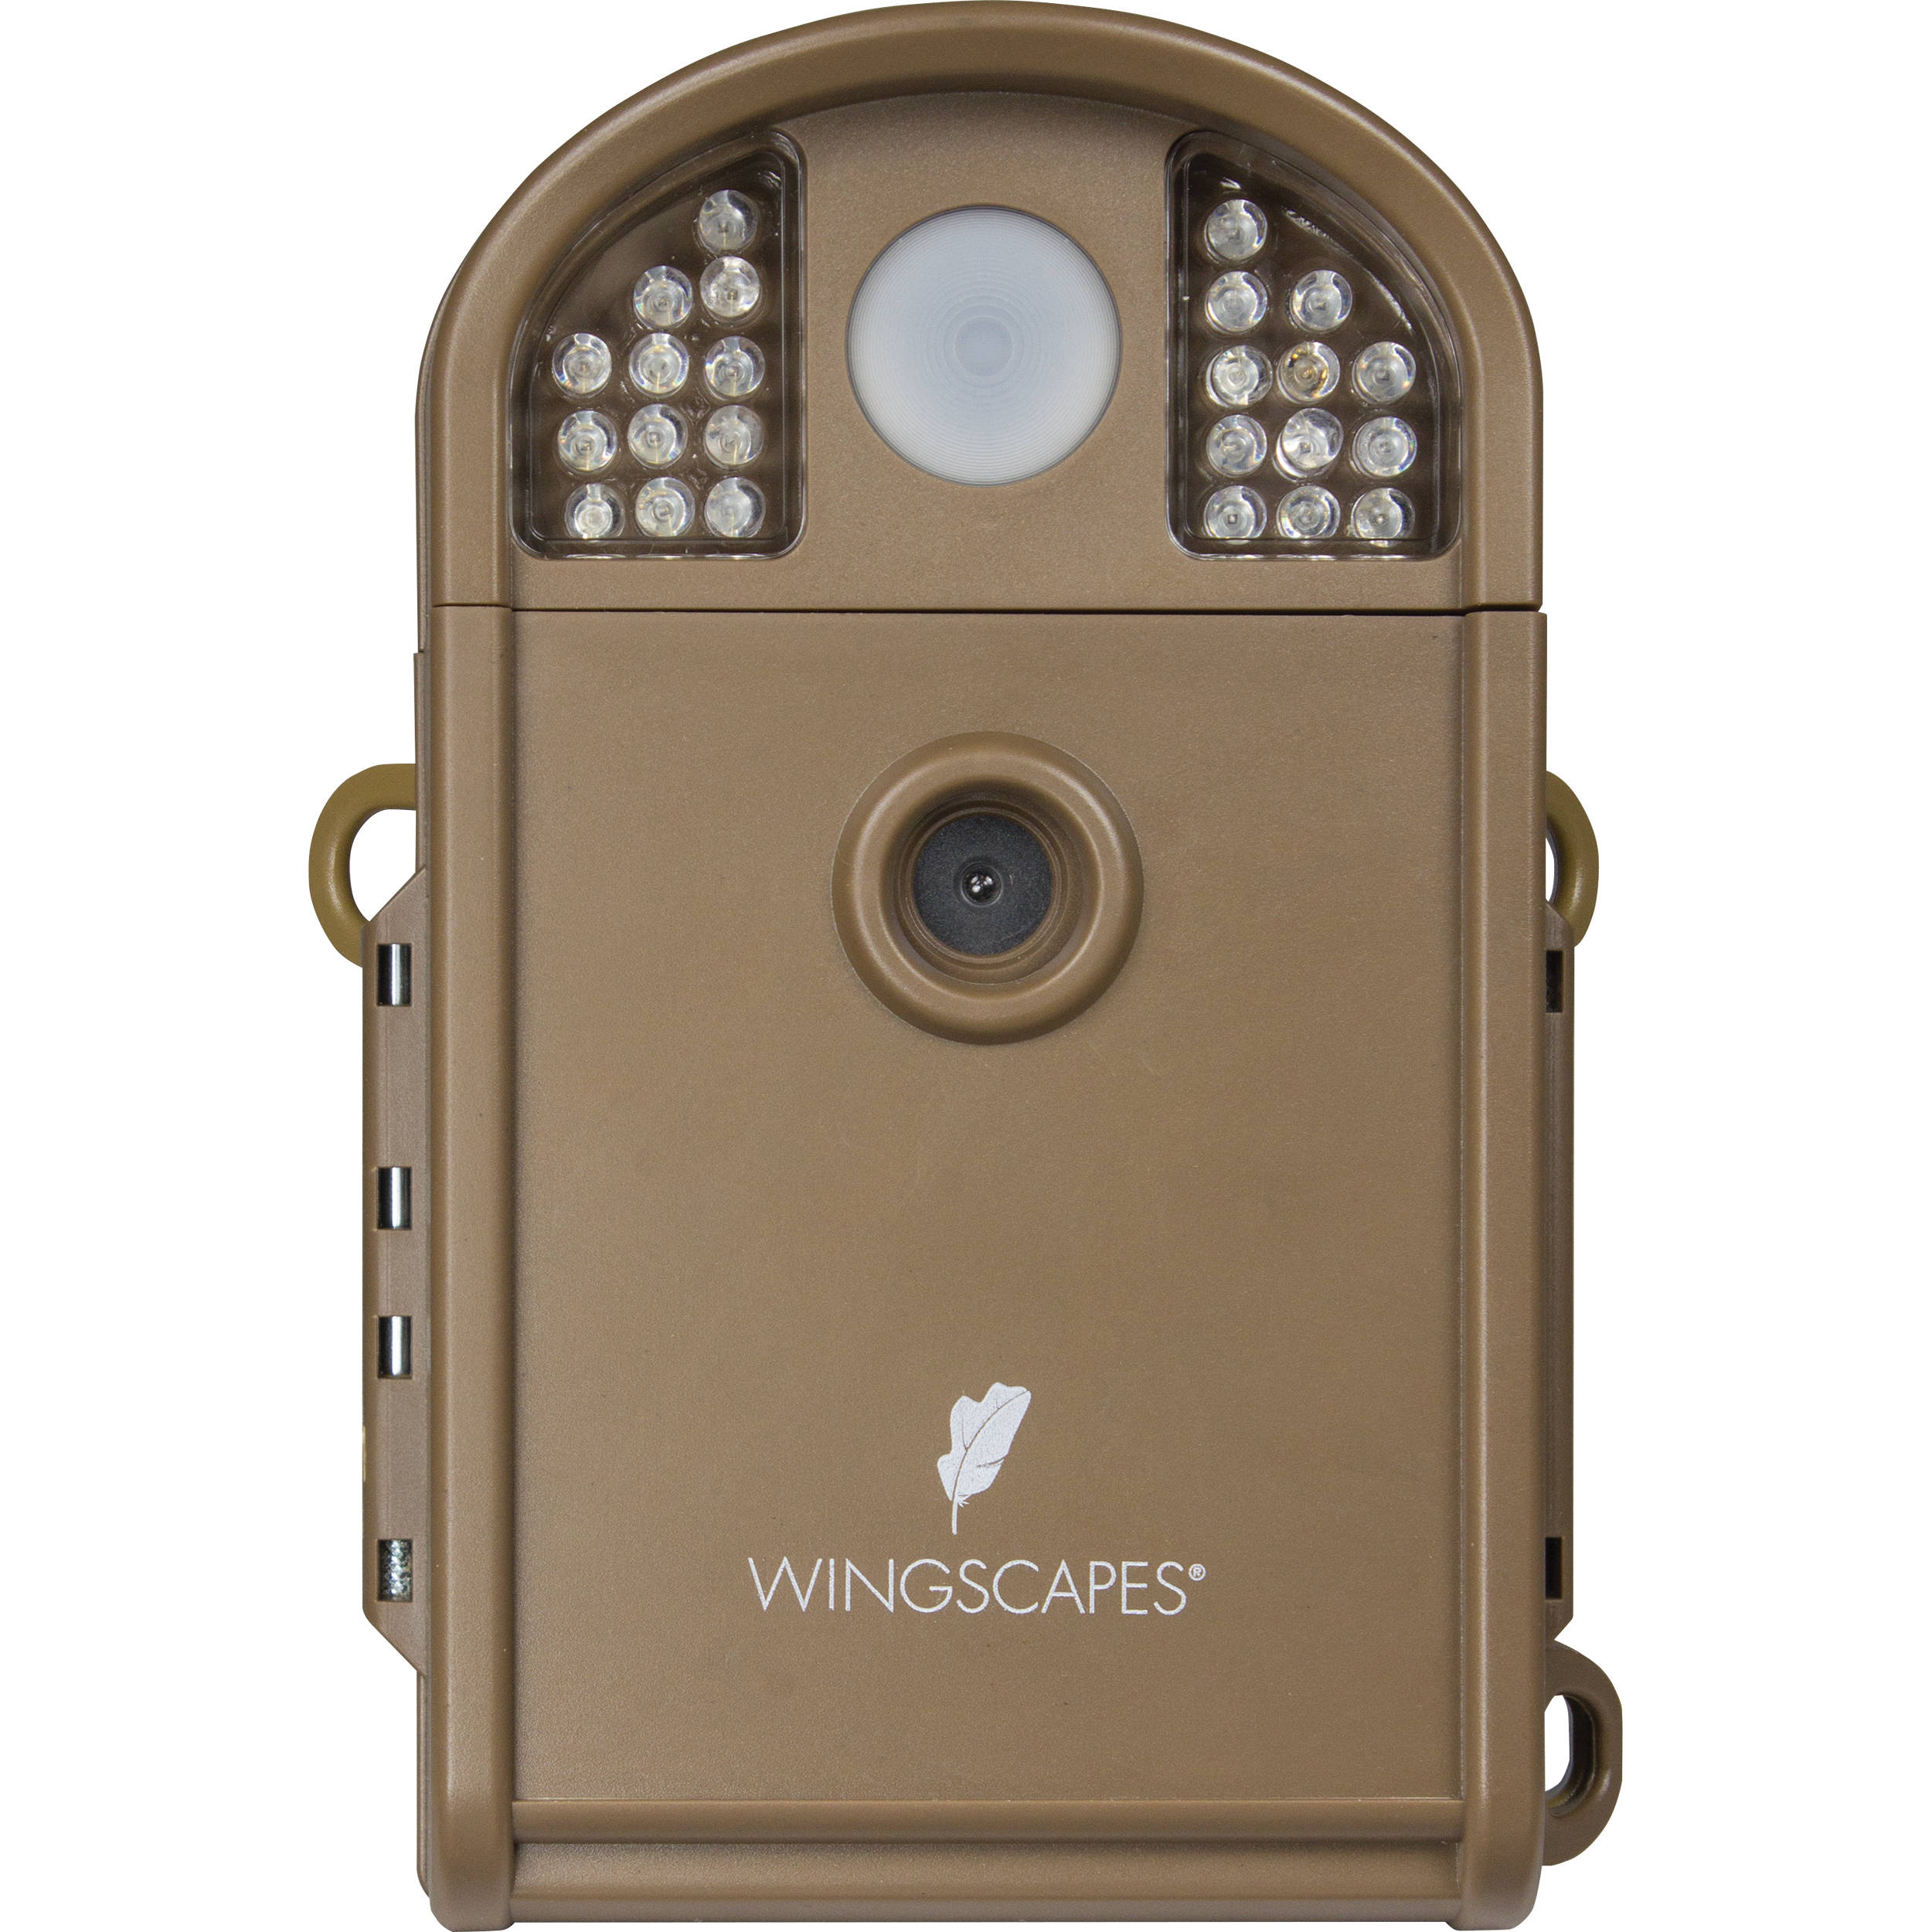 Moultrie Wingscapes Backyard Wildlifecam Digital Game Wcw 00124